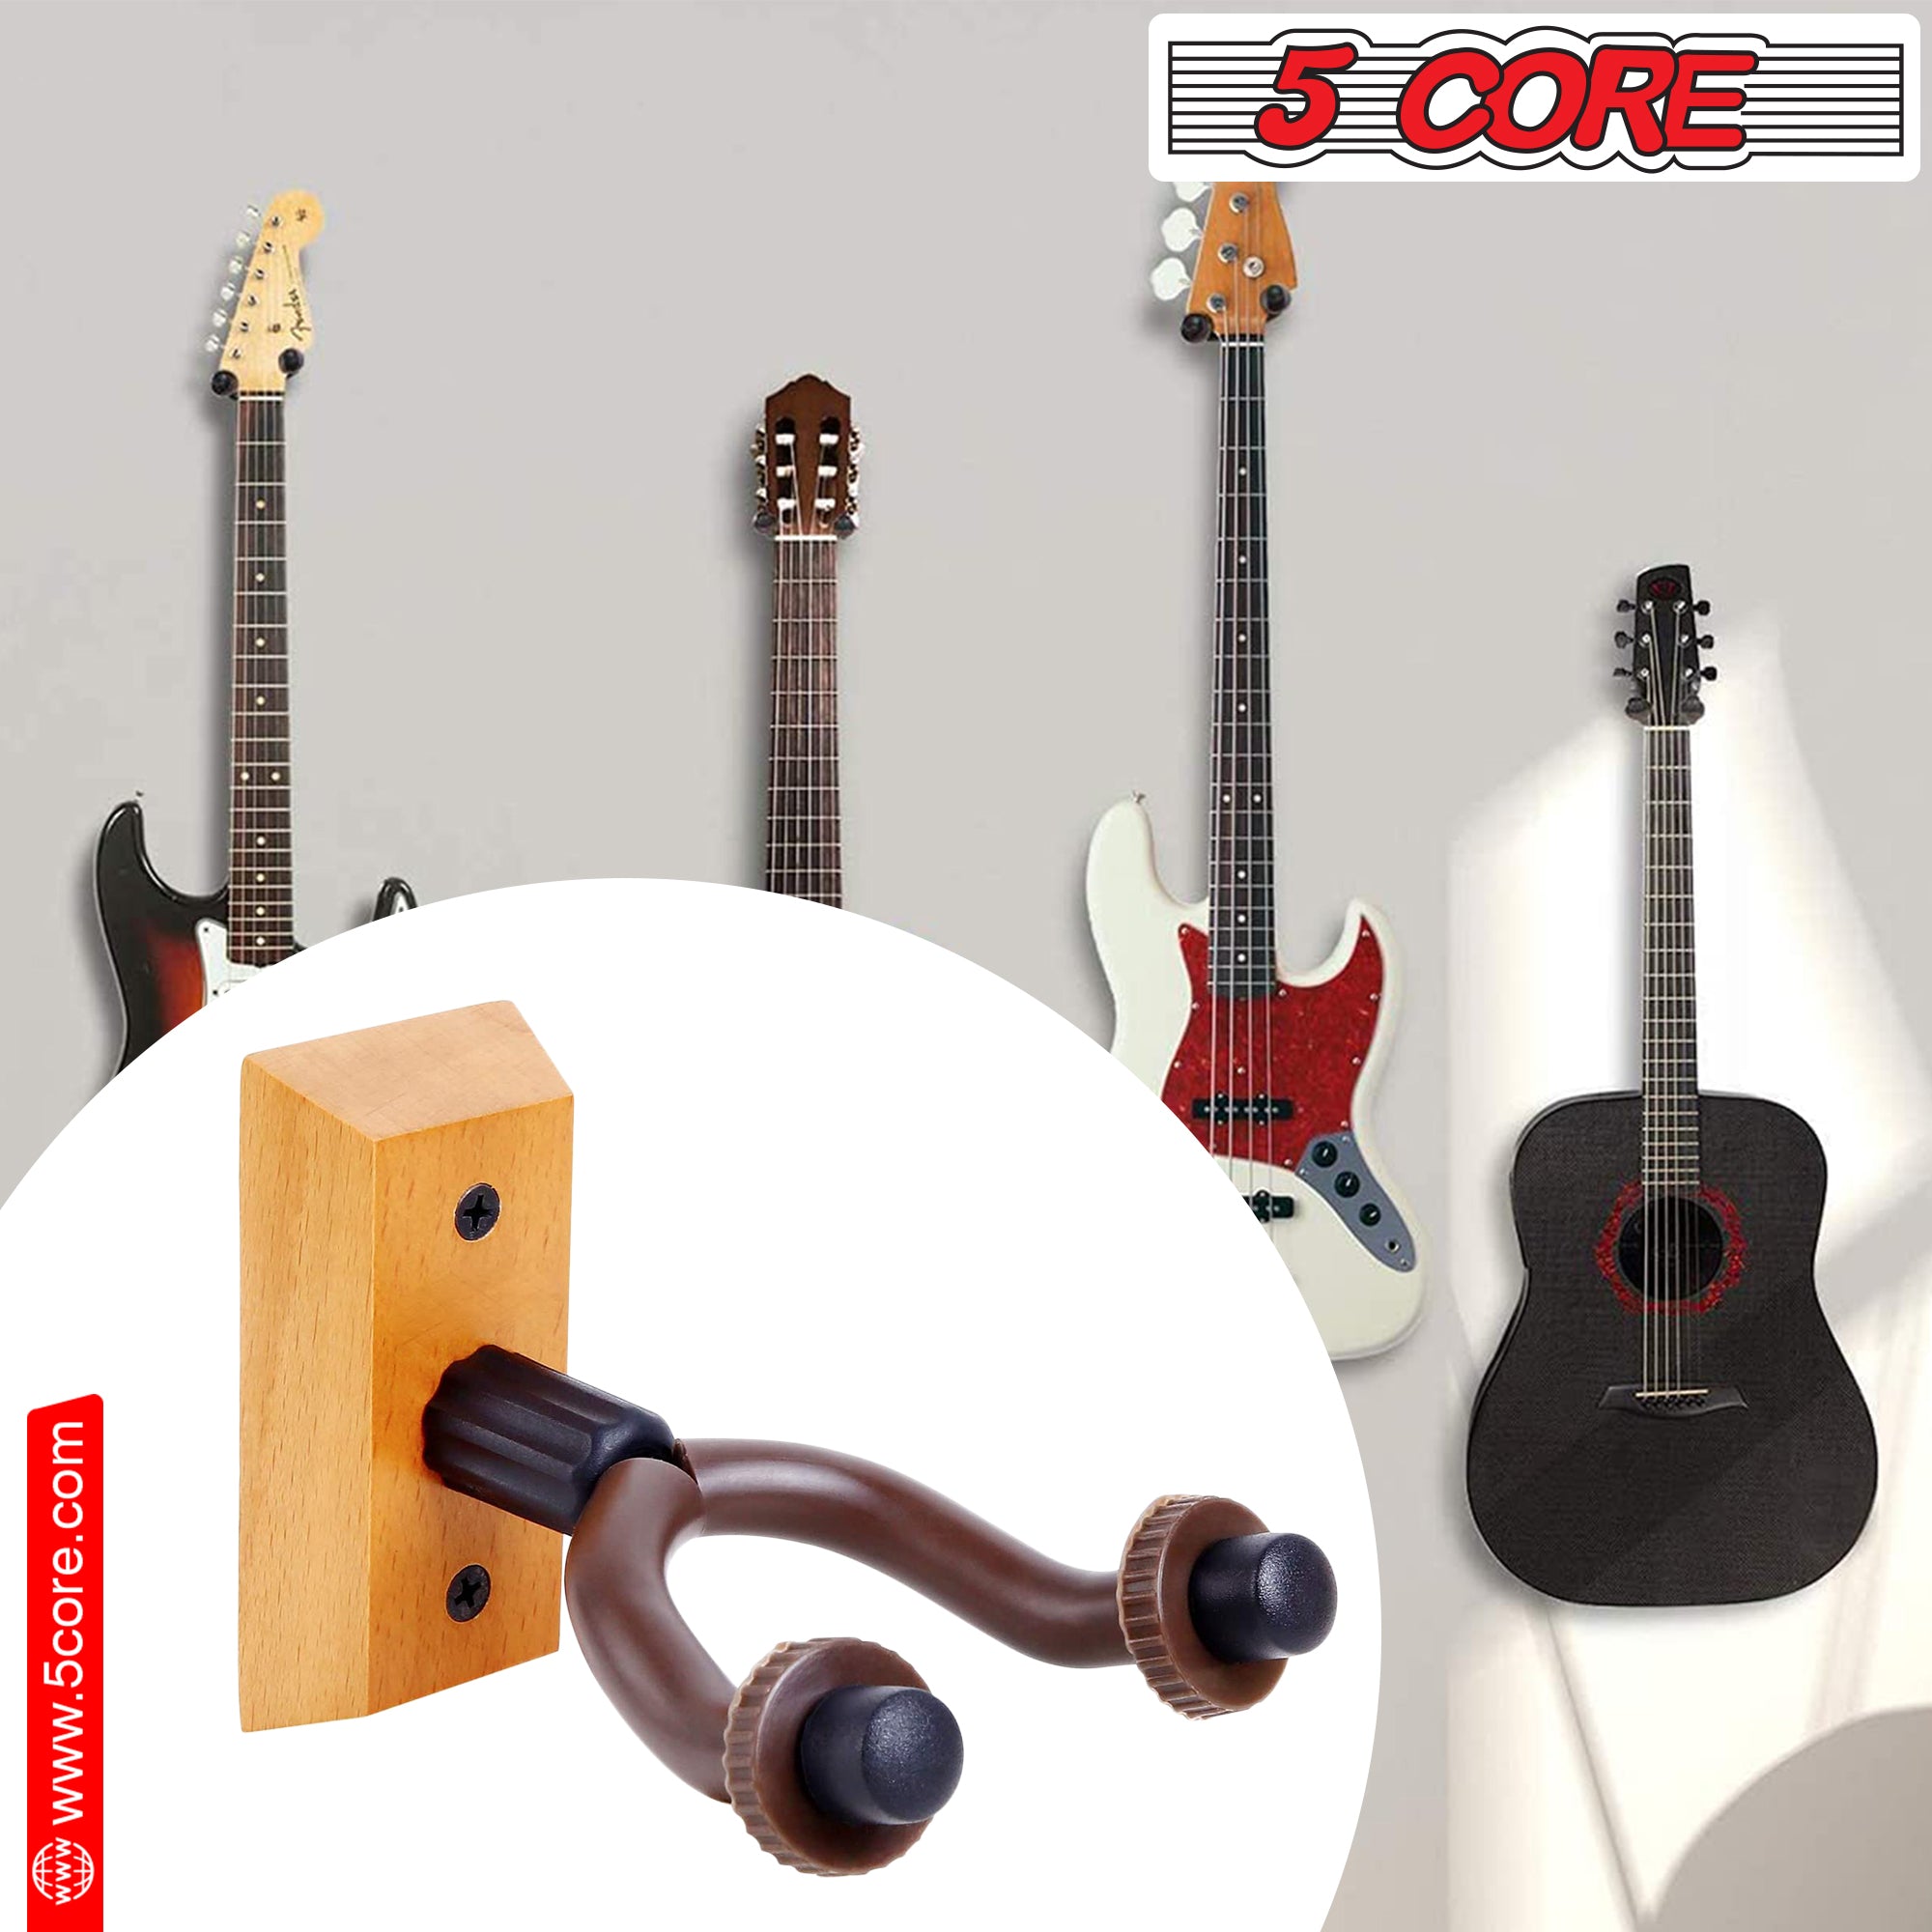 5 Core Guitar Hanger Holder - Electric Acoustic & Bass Guitars for Home Studio Musical Instruments - Wall Mount with Accessories (Wooden 2 Pieces) - GH WD 2PCS